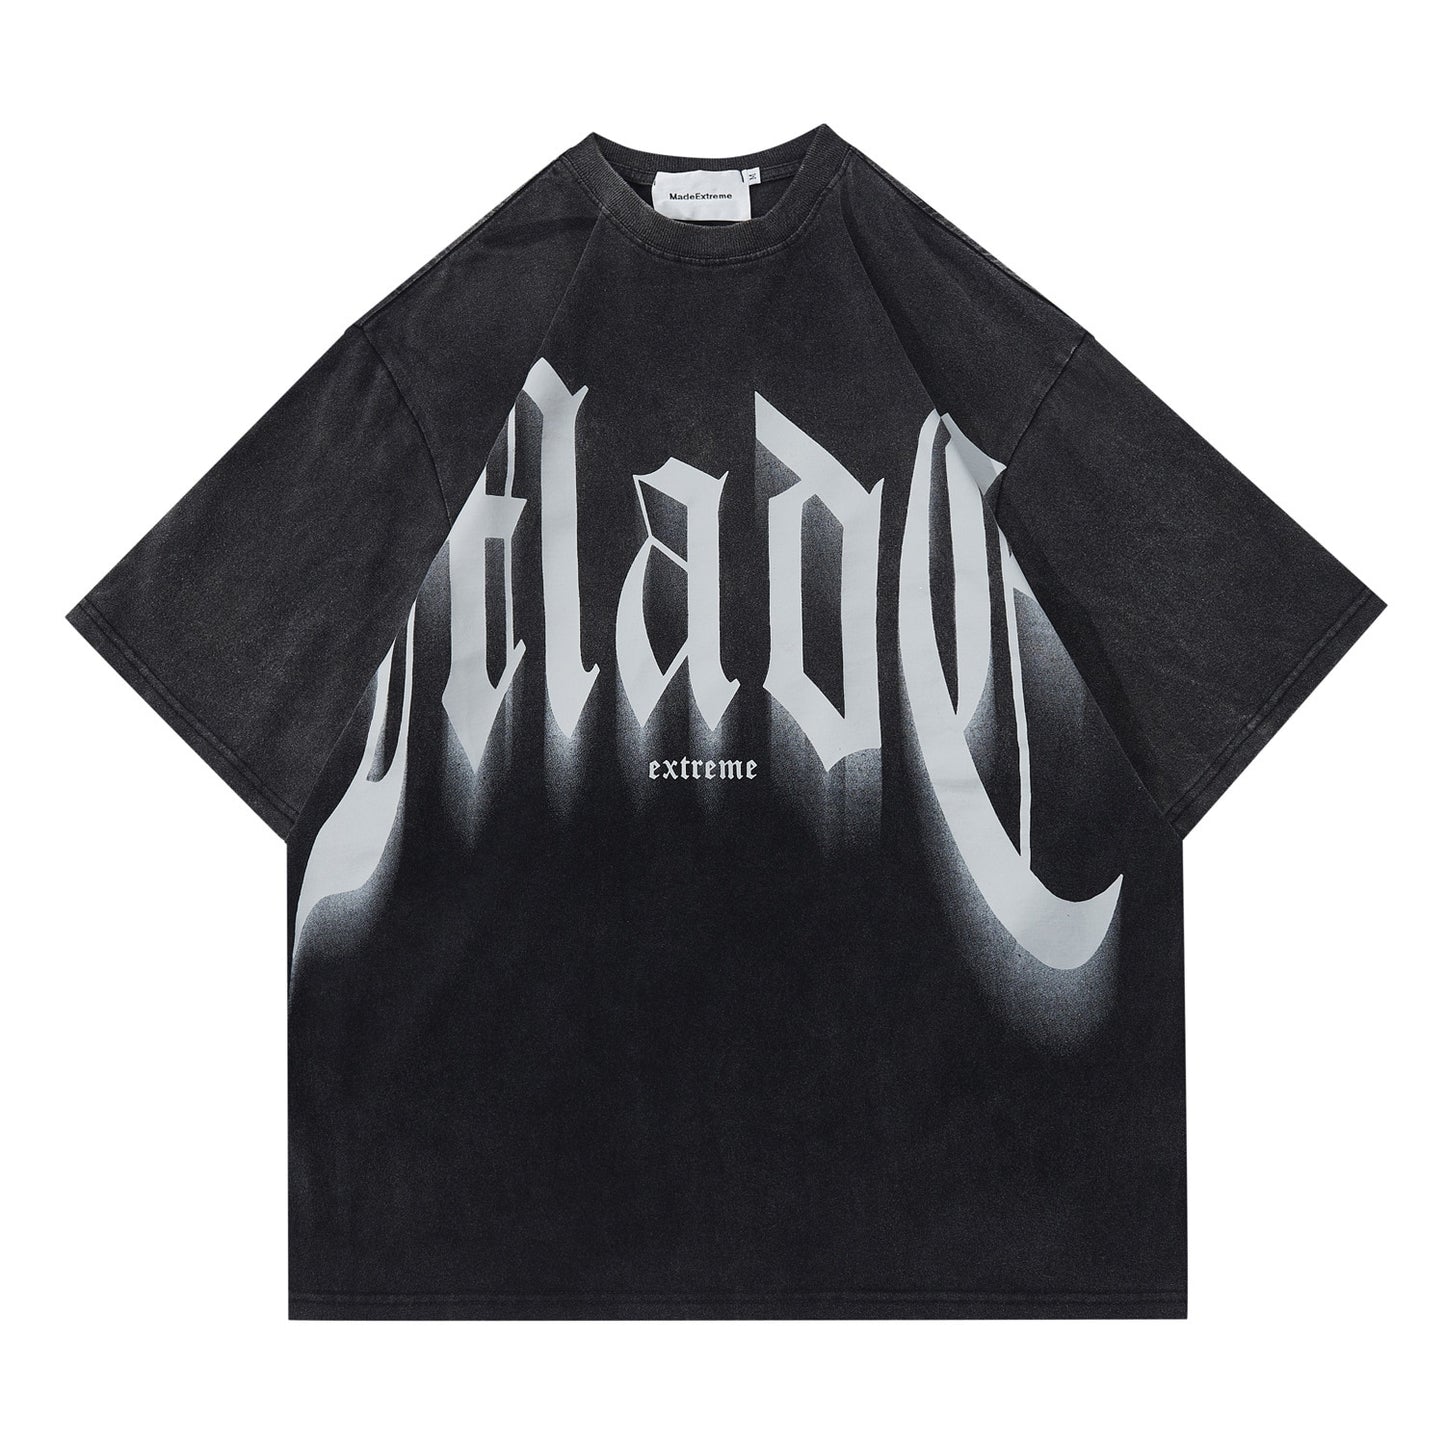 MADE EXTREME LARGE LETTERS PRINT LOOSE WASHED T-SHIRT